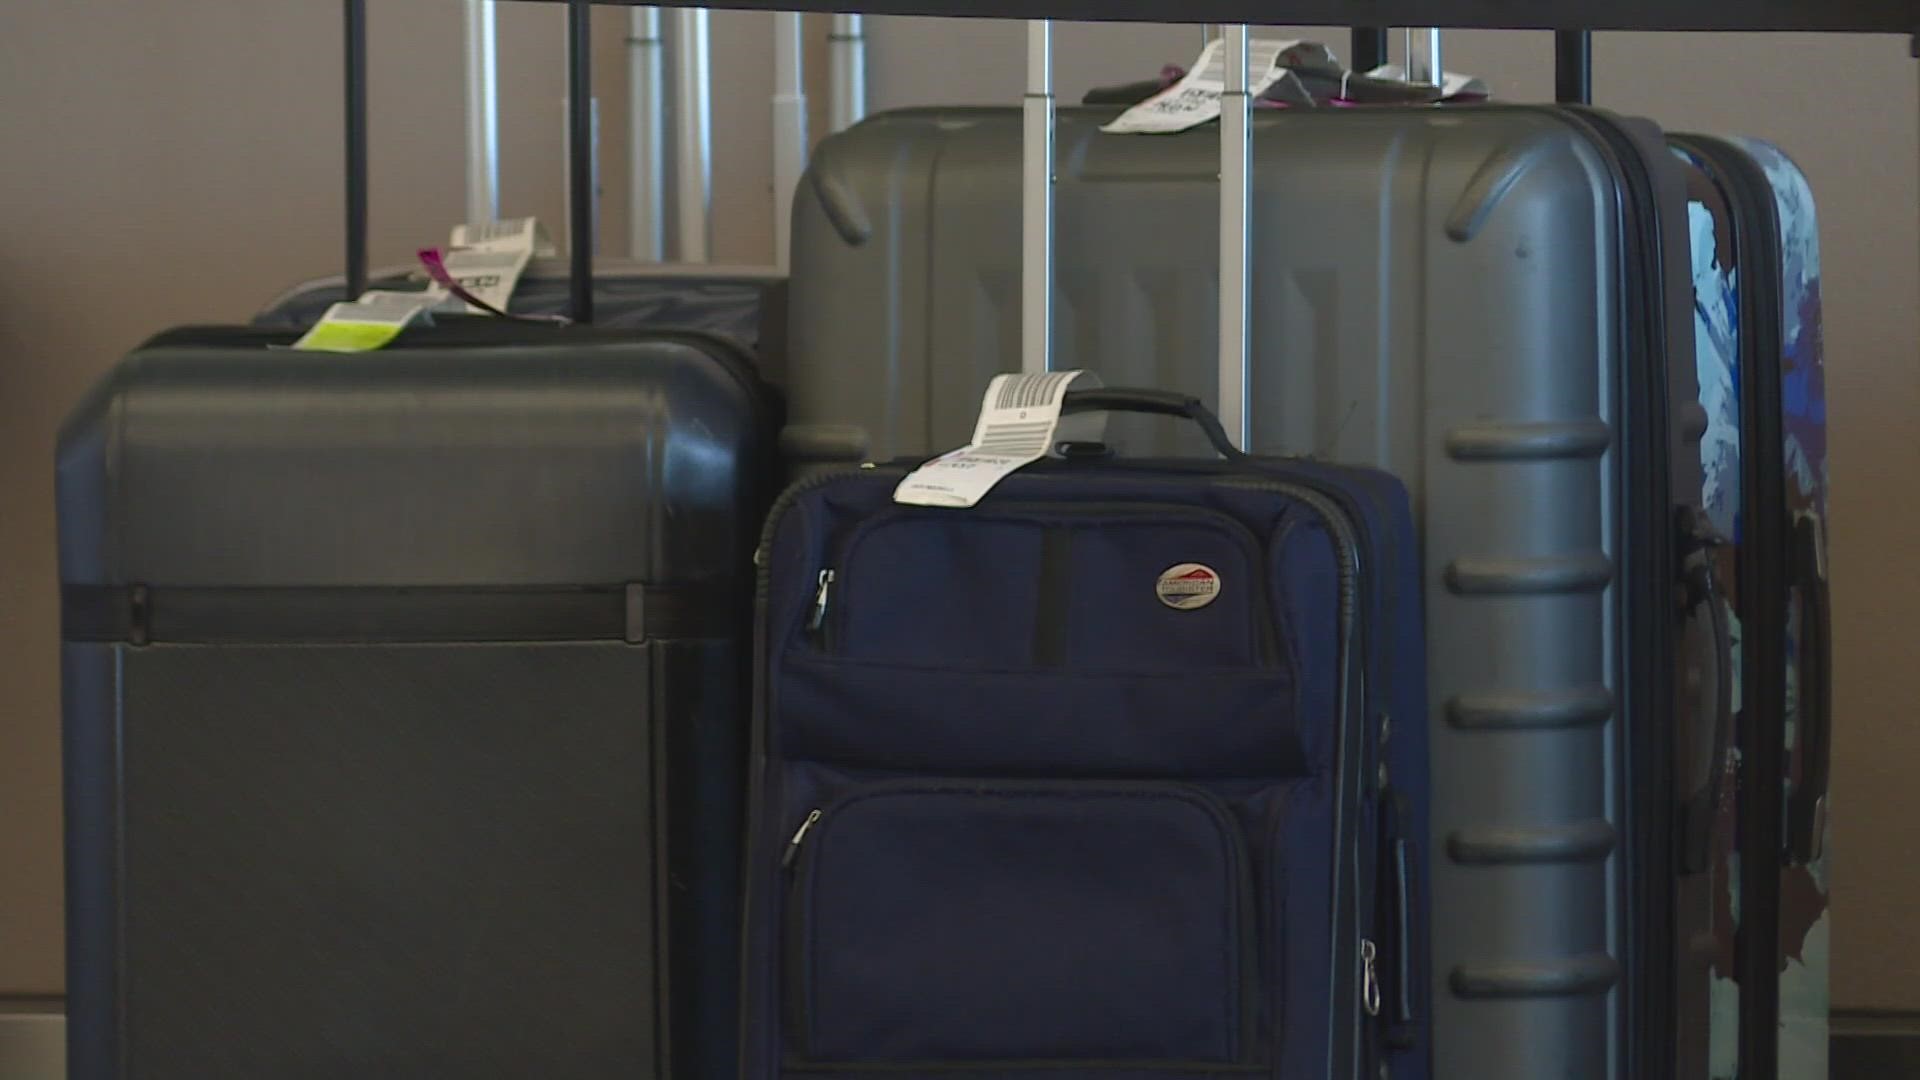 Brittney Buckley last saw her bags on Dec. 21 before she flew to Chicago.